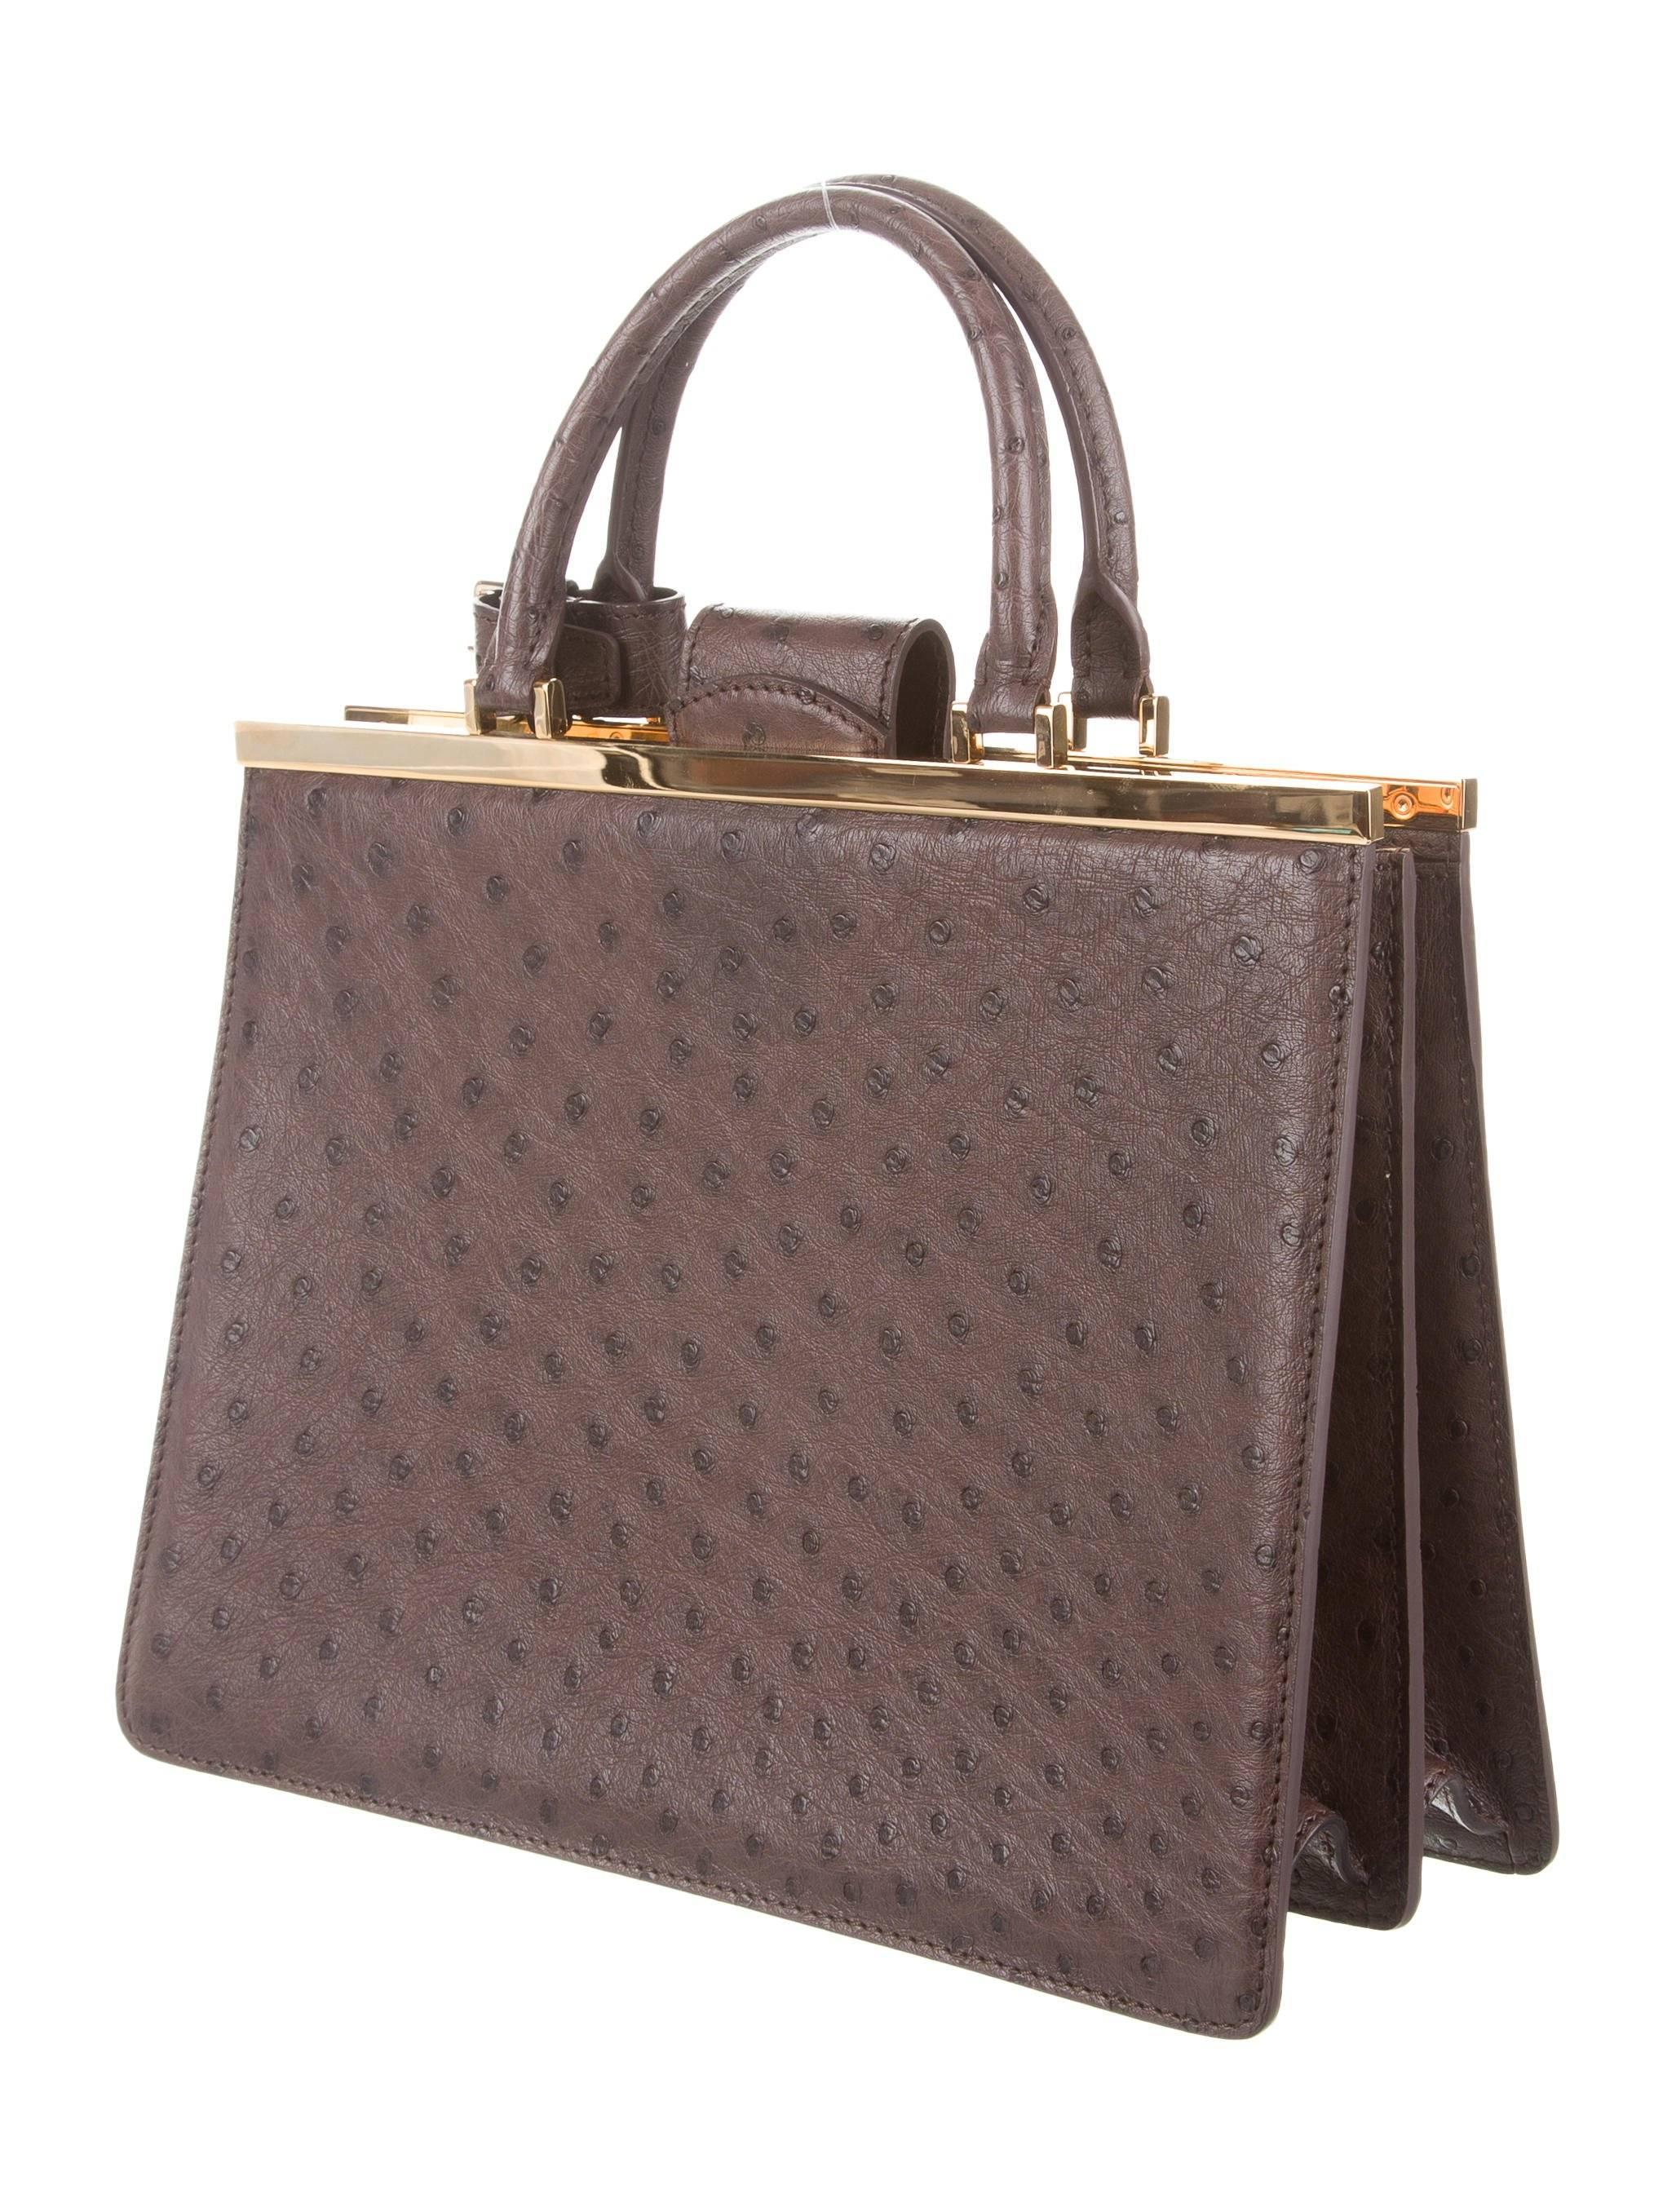 Louis Vuitton NEW Limited Edition Taupe Brown Gold Exotic Kelly Style Evening Top Handle Satchel Bag 

Original purchase price $32,500
Ostrich
Brass gold tone hardware
Leather lining
Magnetic closure 
Date code present
Handle drop 5